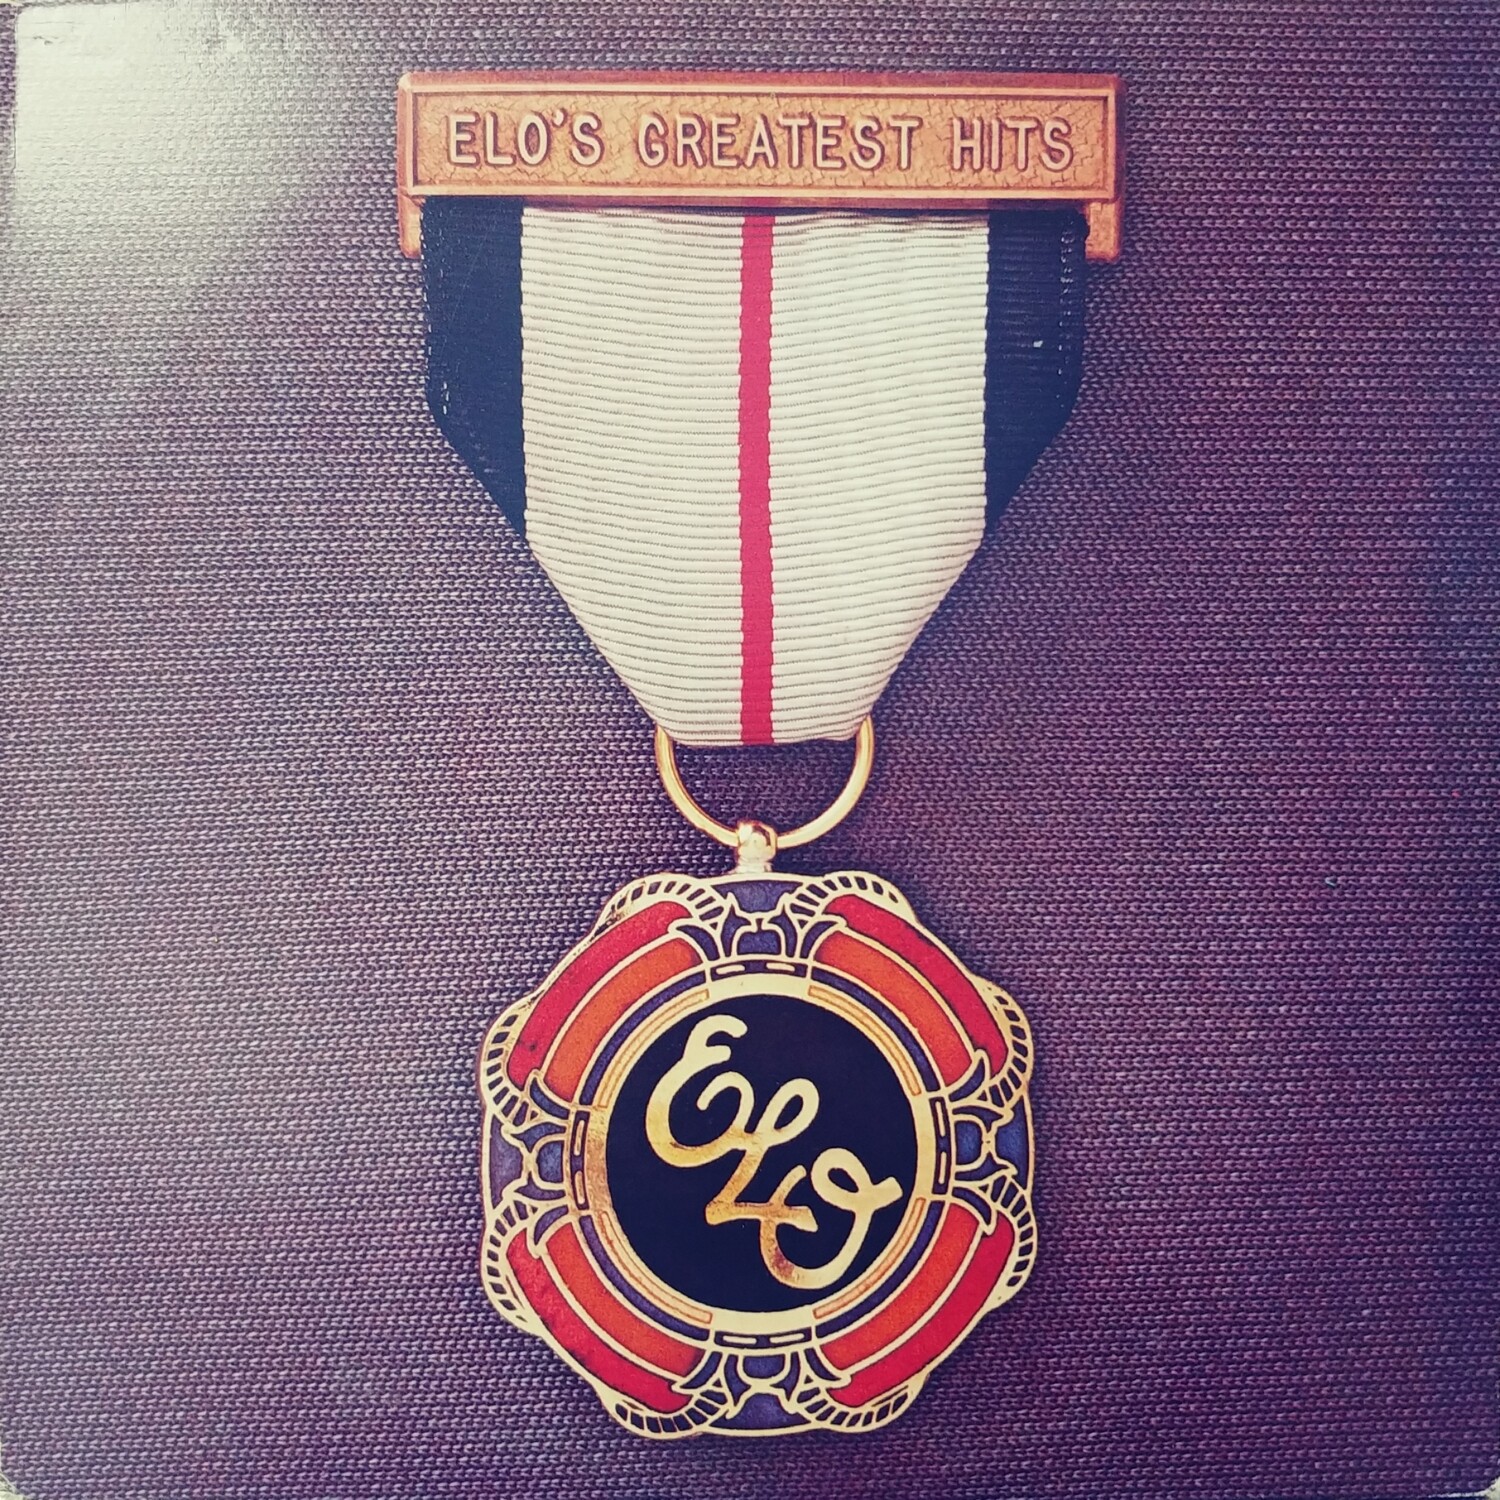 Electric Light Orchestra - ELO Greatest Hits